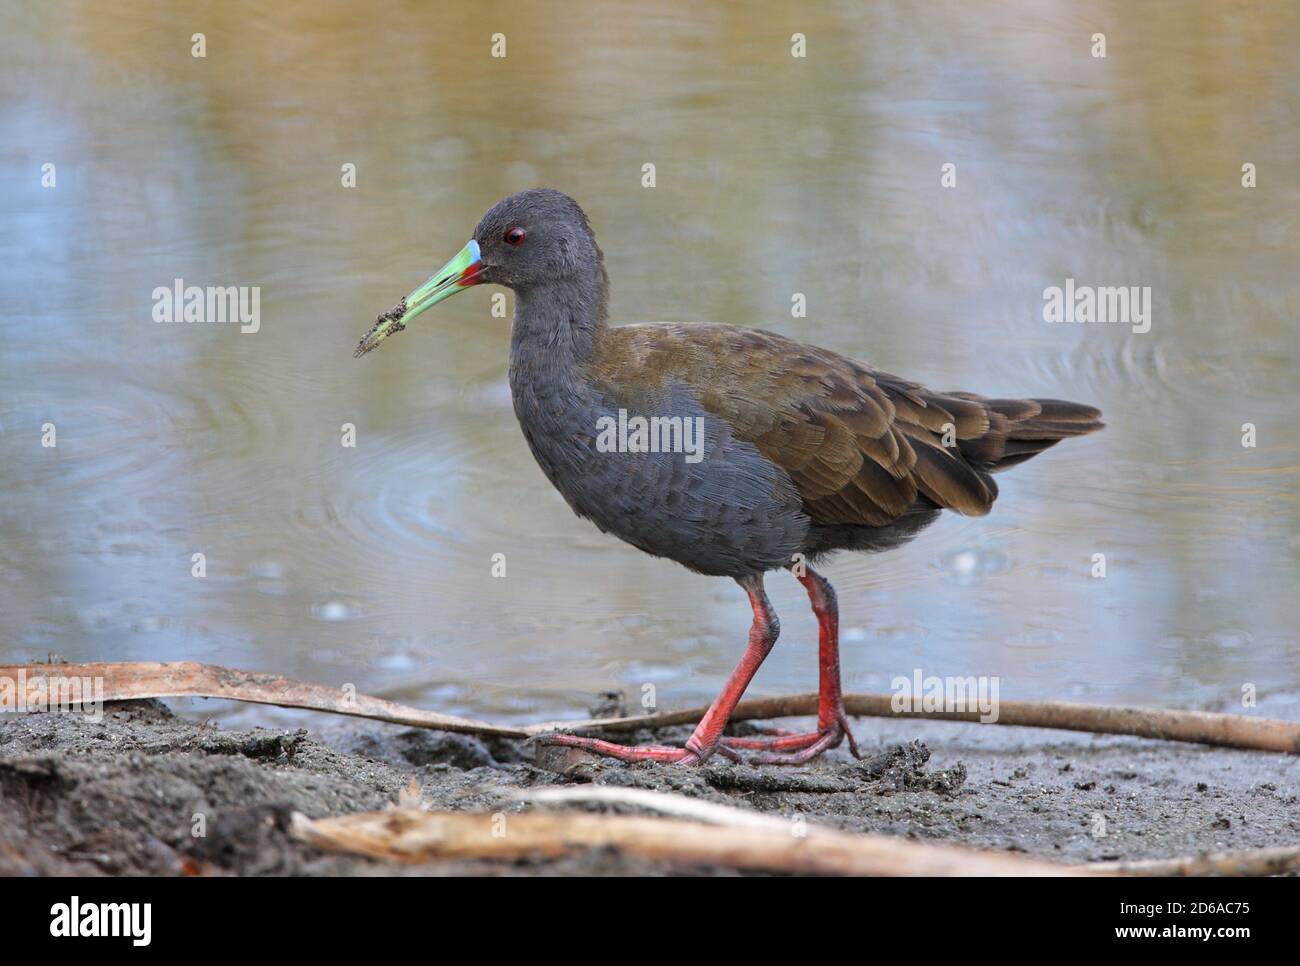 Plumbeous Rail (Rallus sanguinolentus) adult at waters edge with muddy bill  Buenos Aires Province, Argentina          January Stock Photo